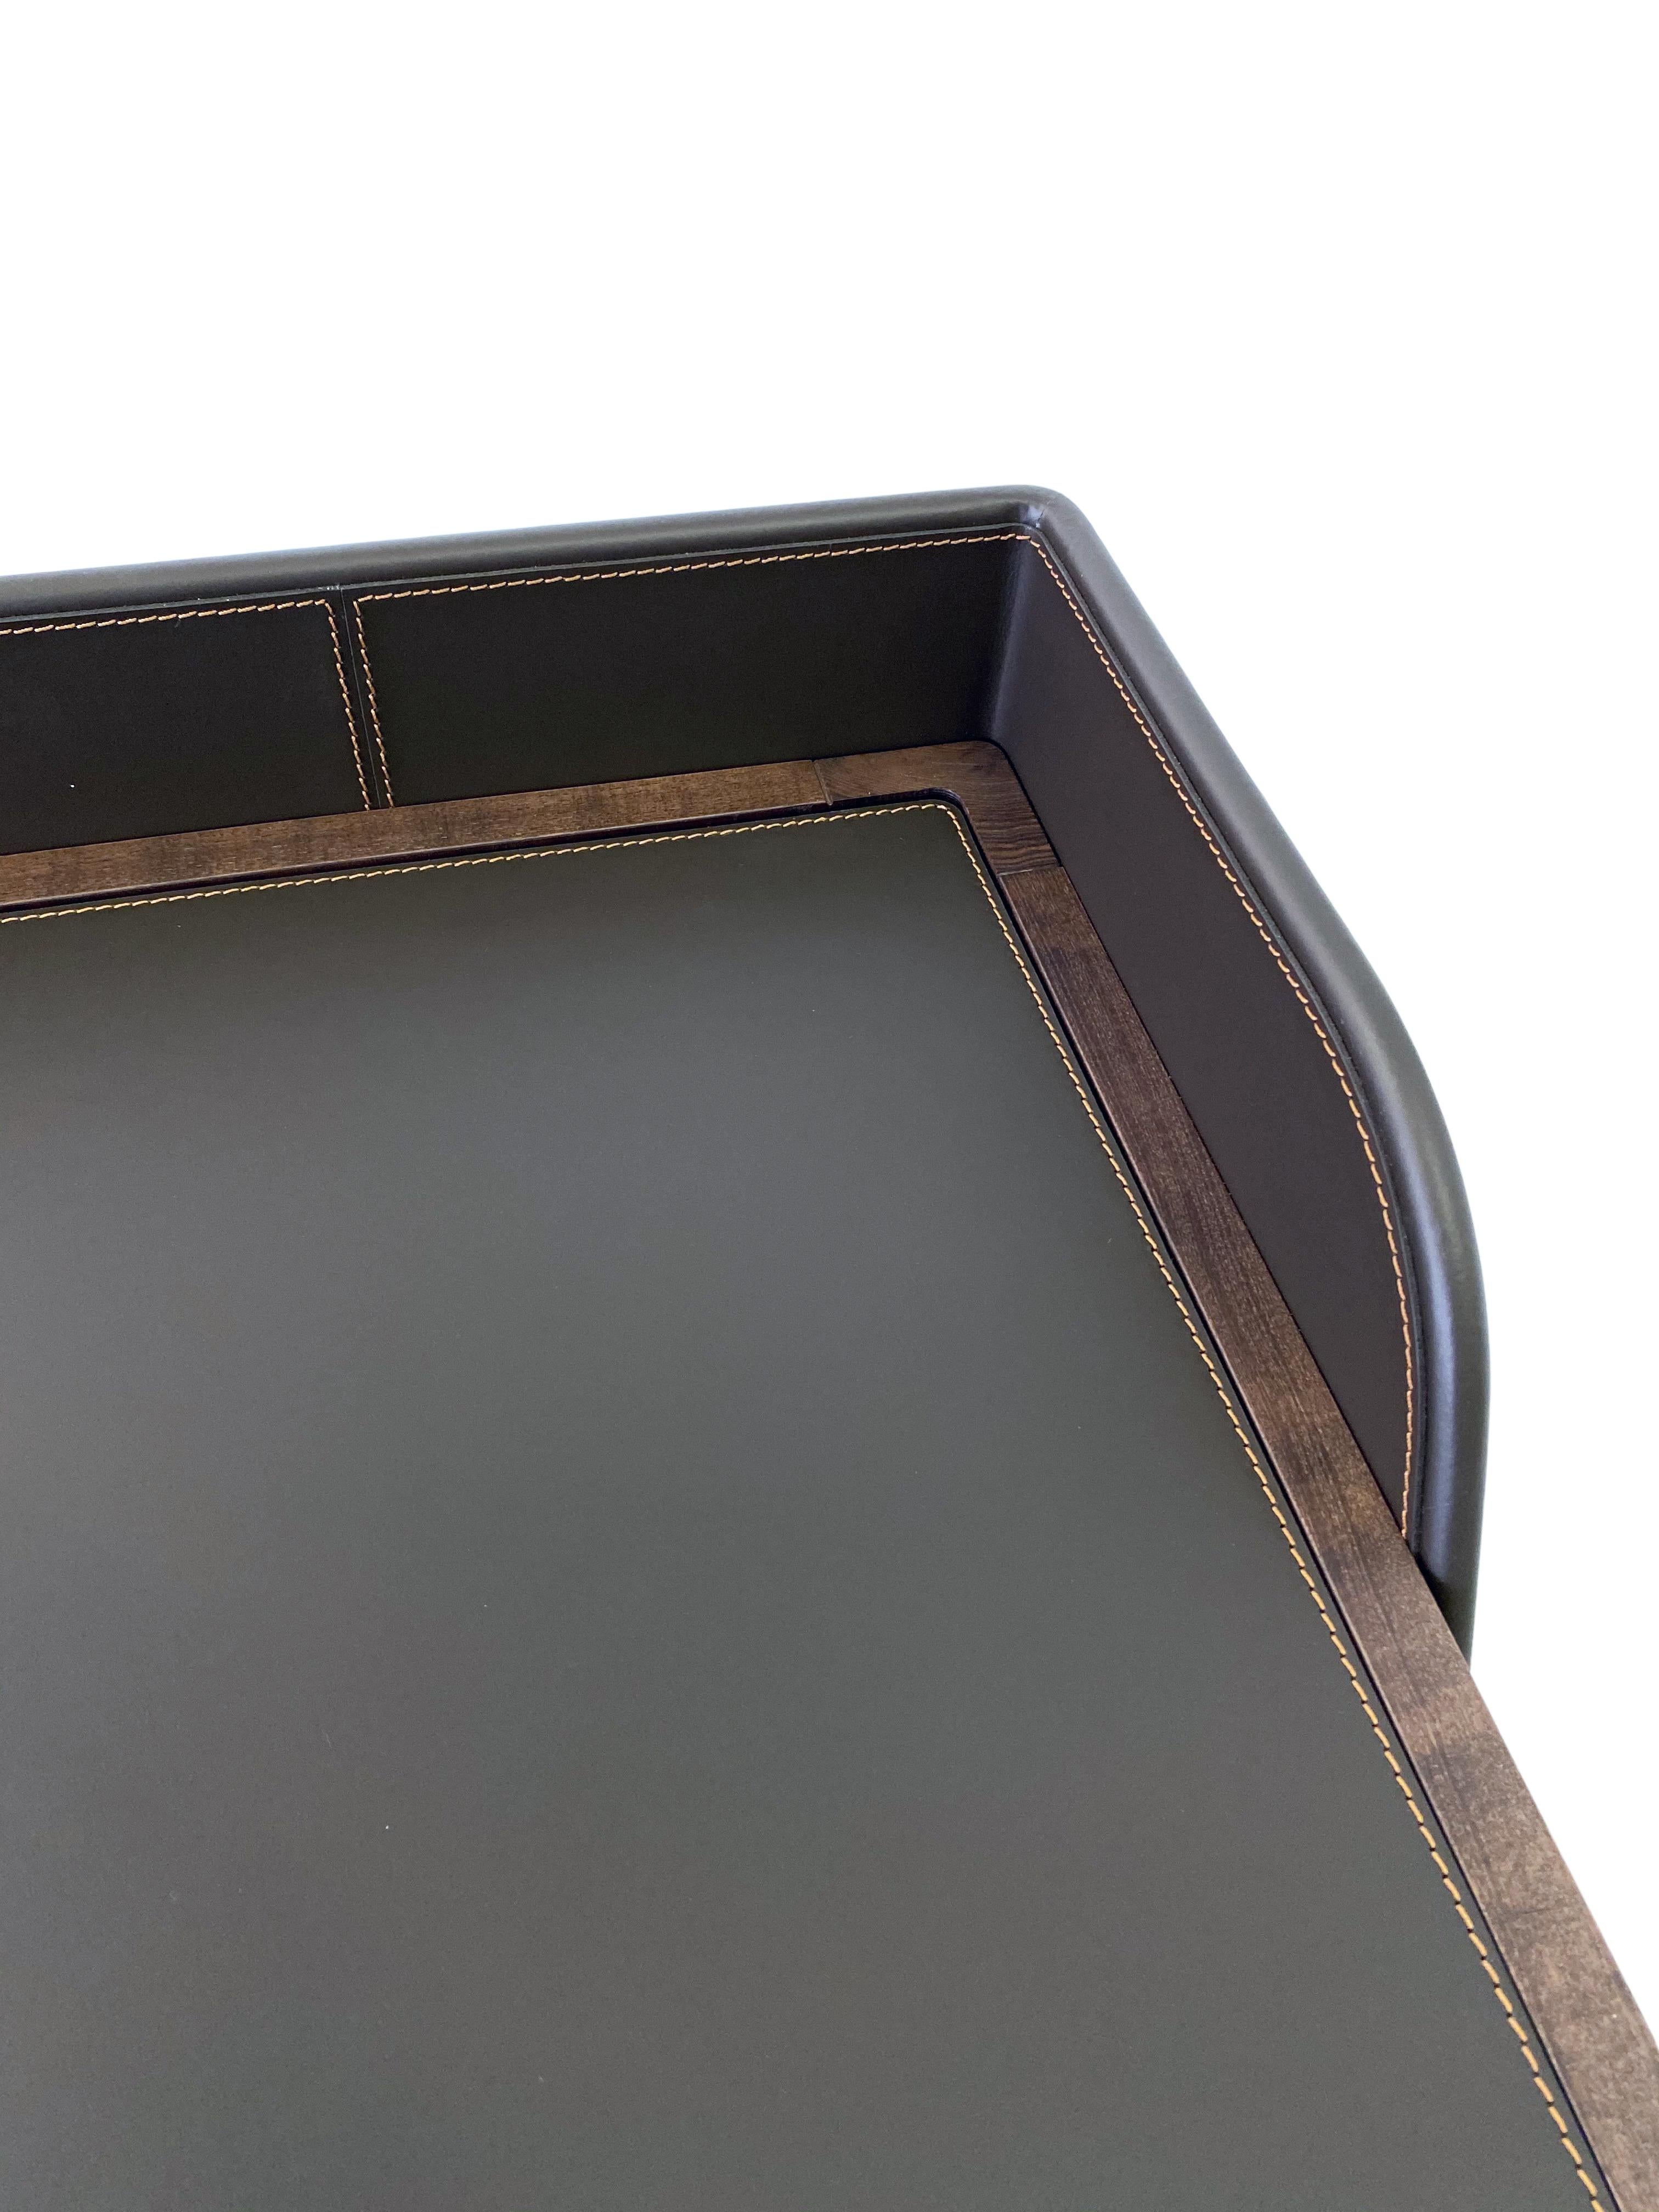 Contemporary Desk Made of Ashwood with Leather Flapping Top, by Morelato 8